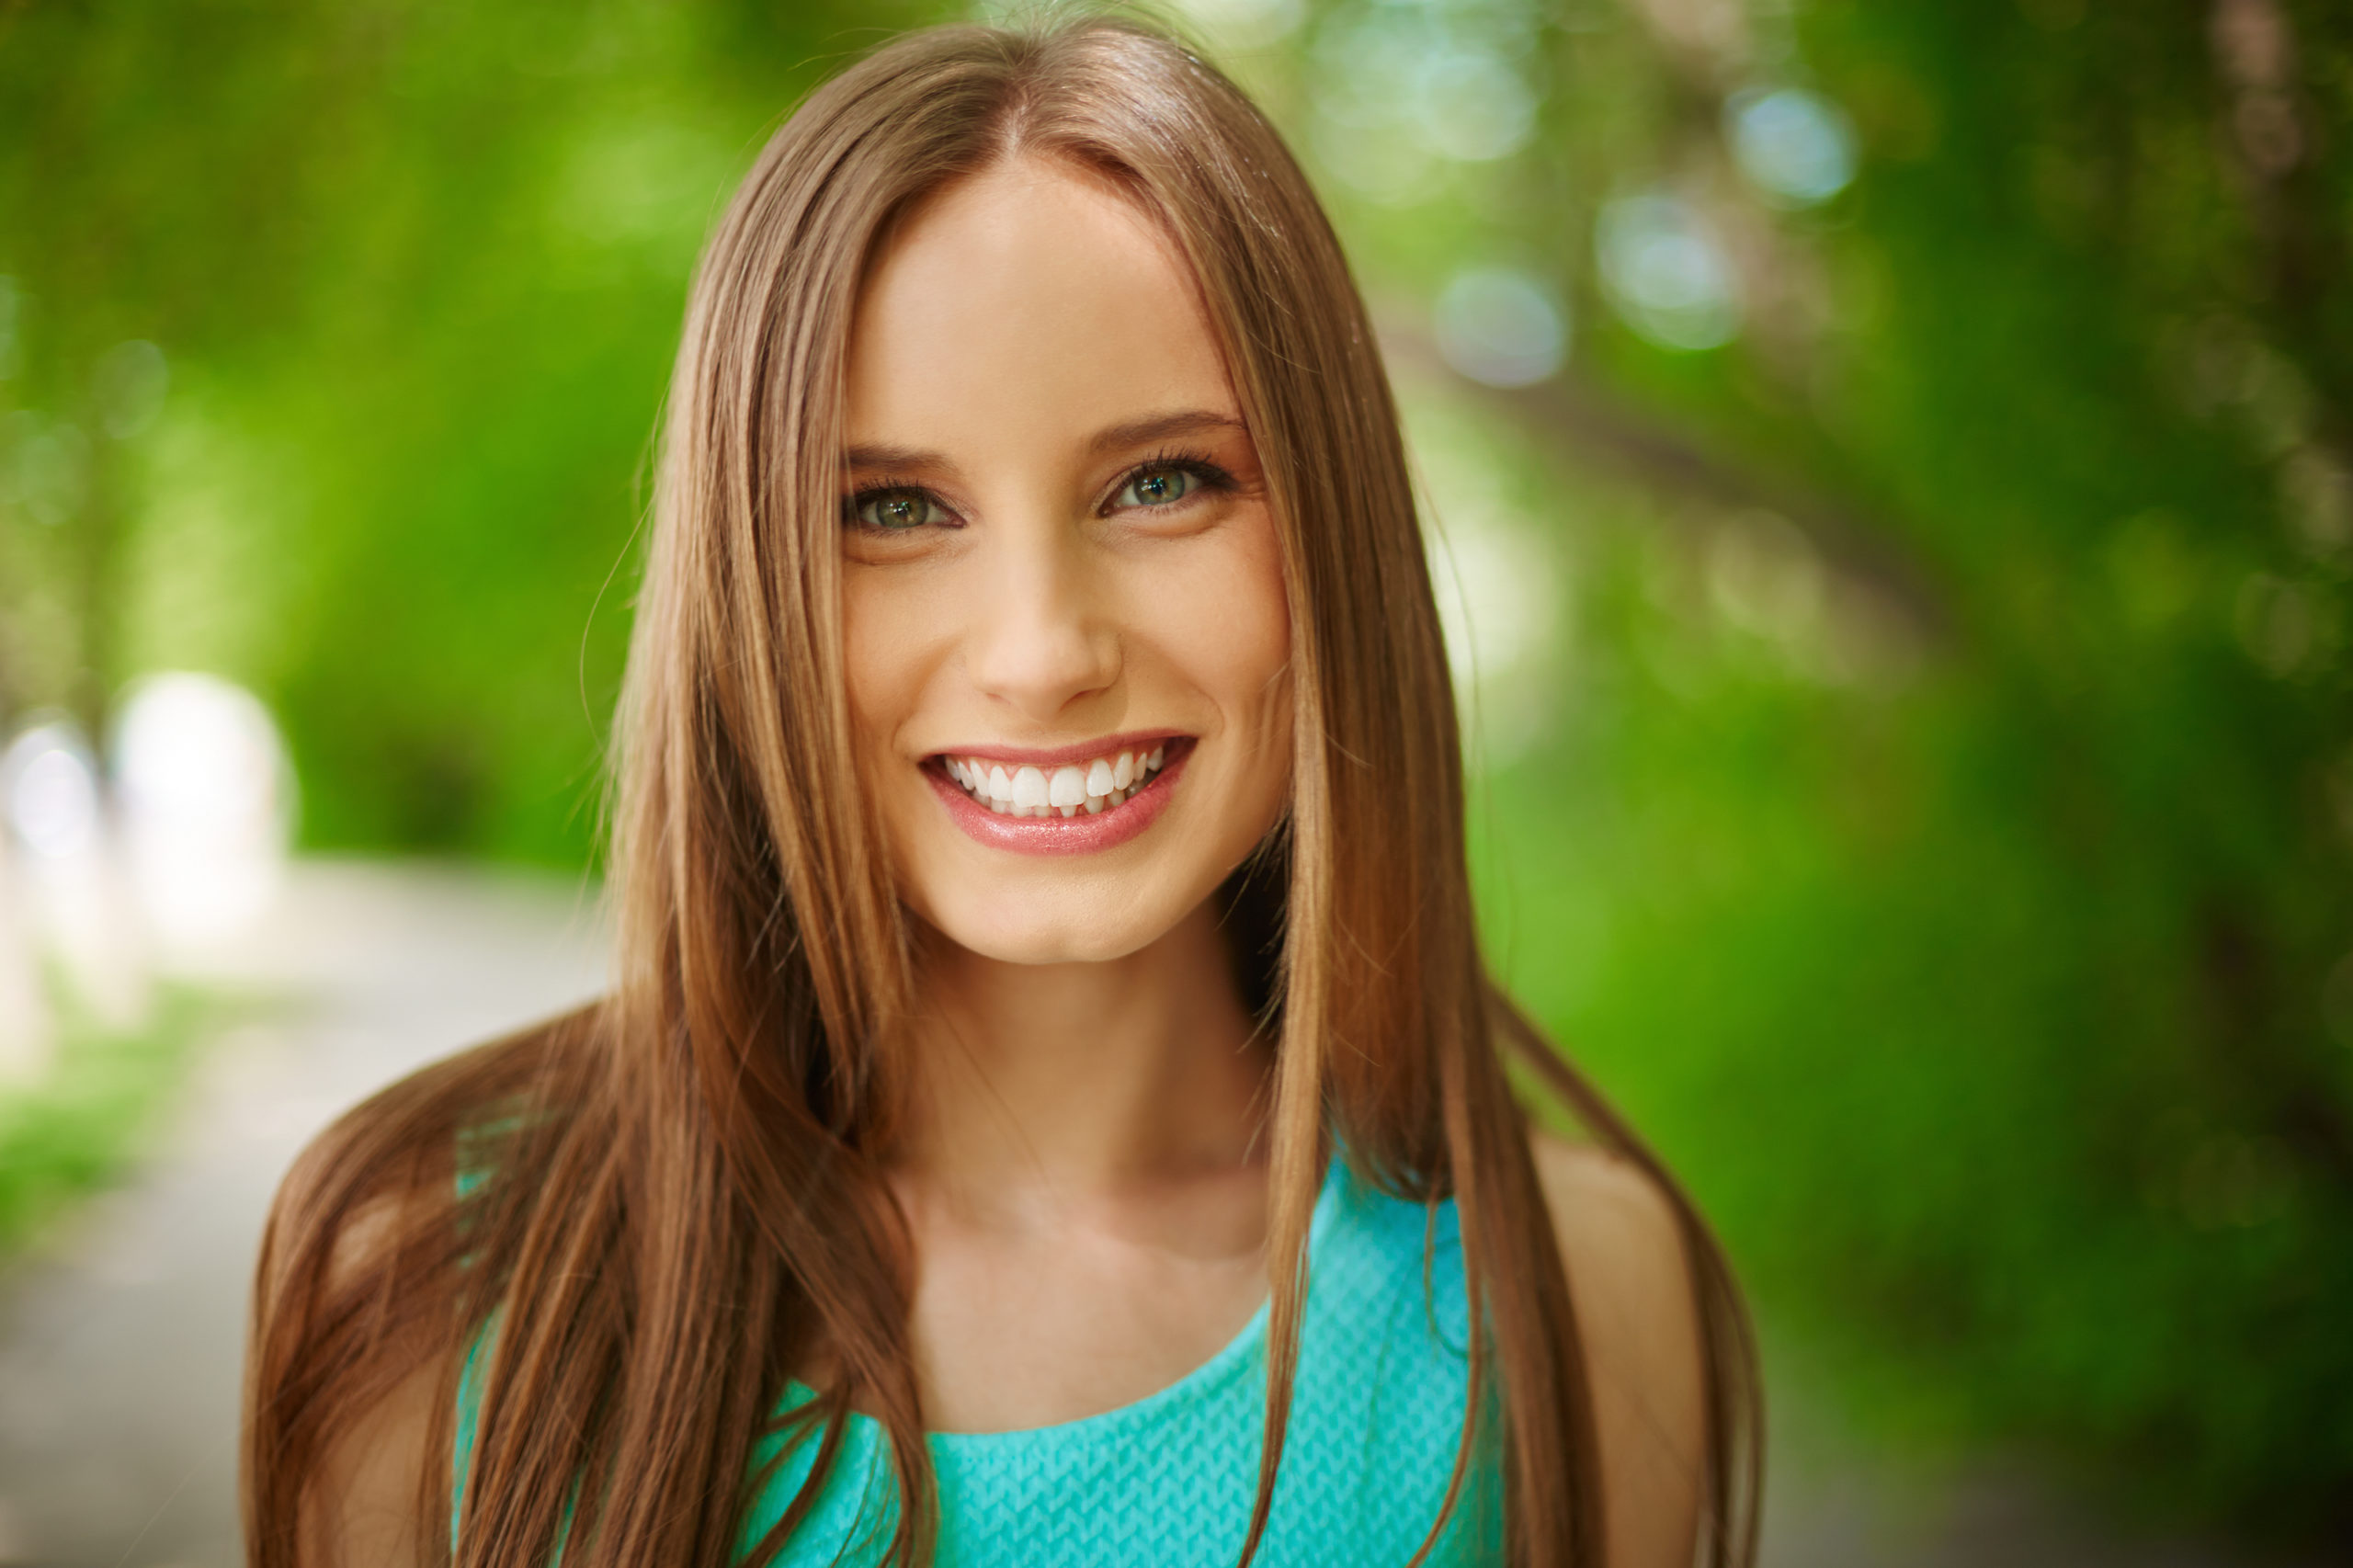 How Visiting the Orthodontist Can Change Your Life